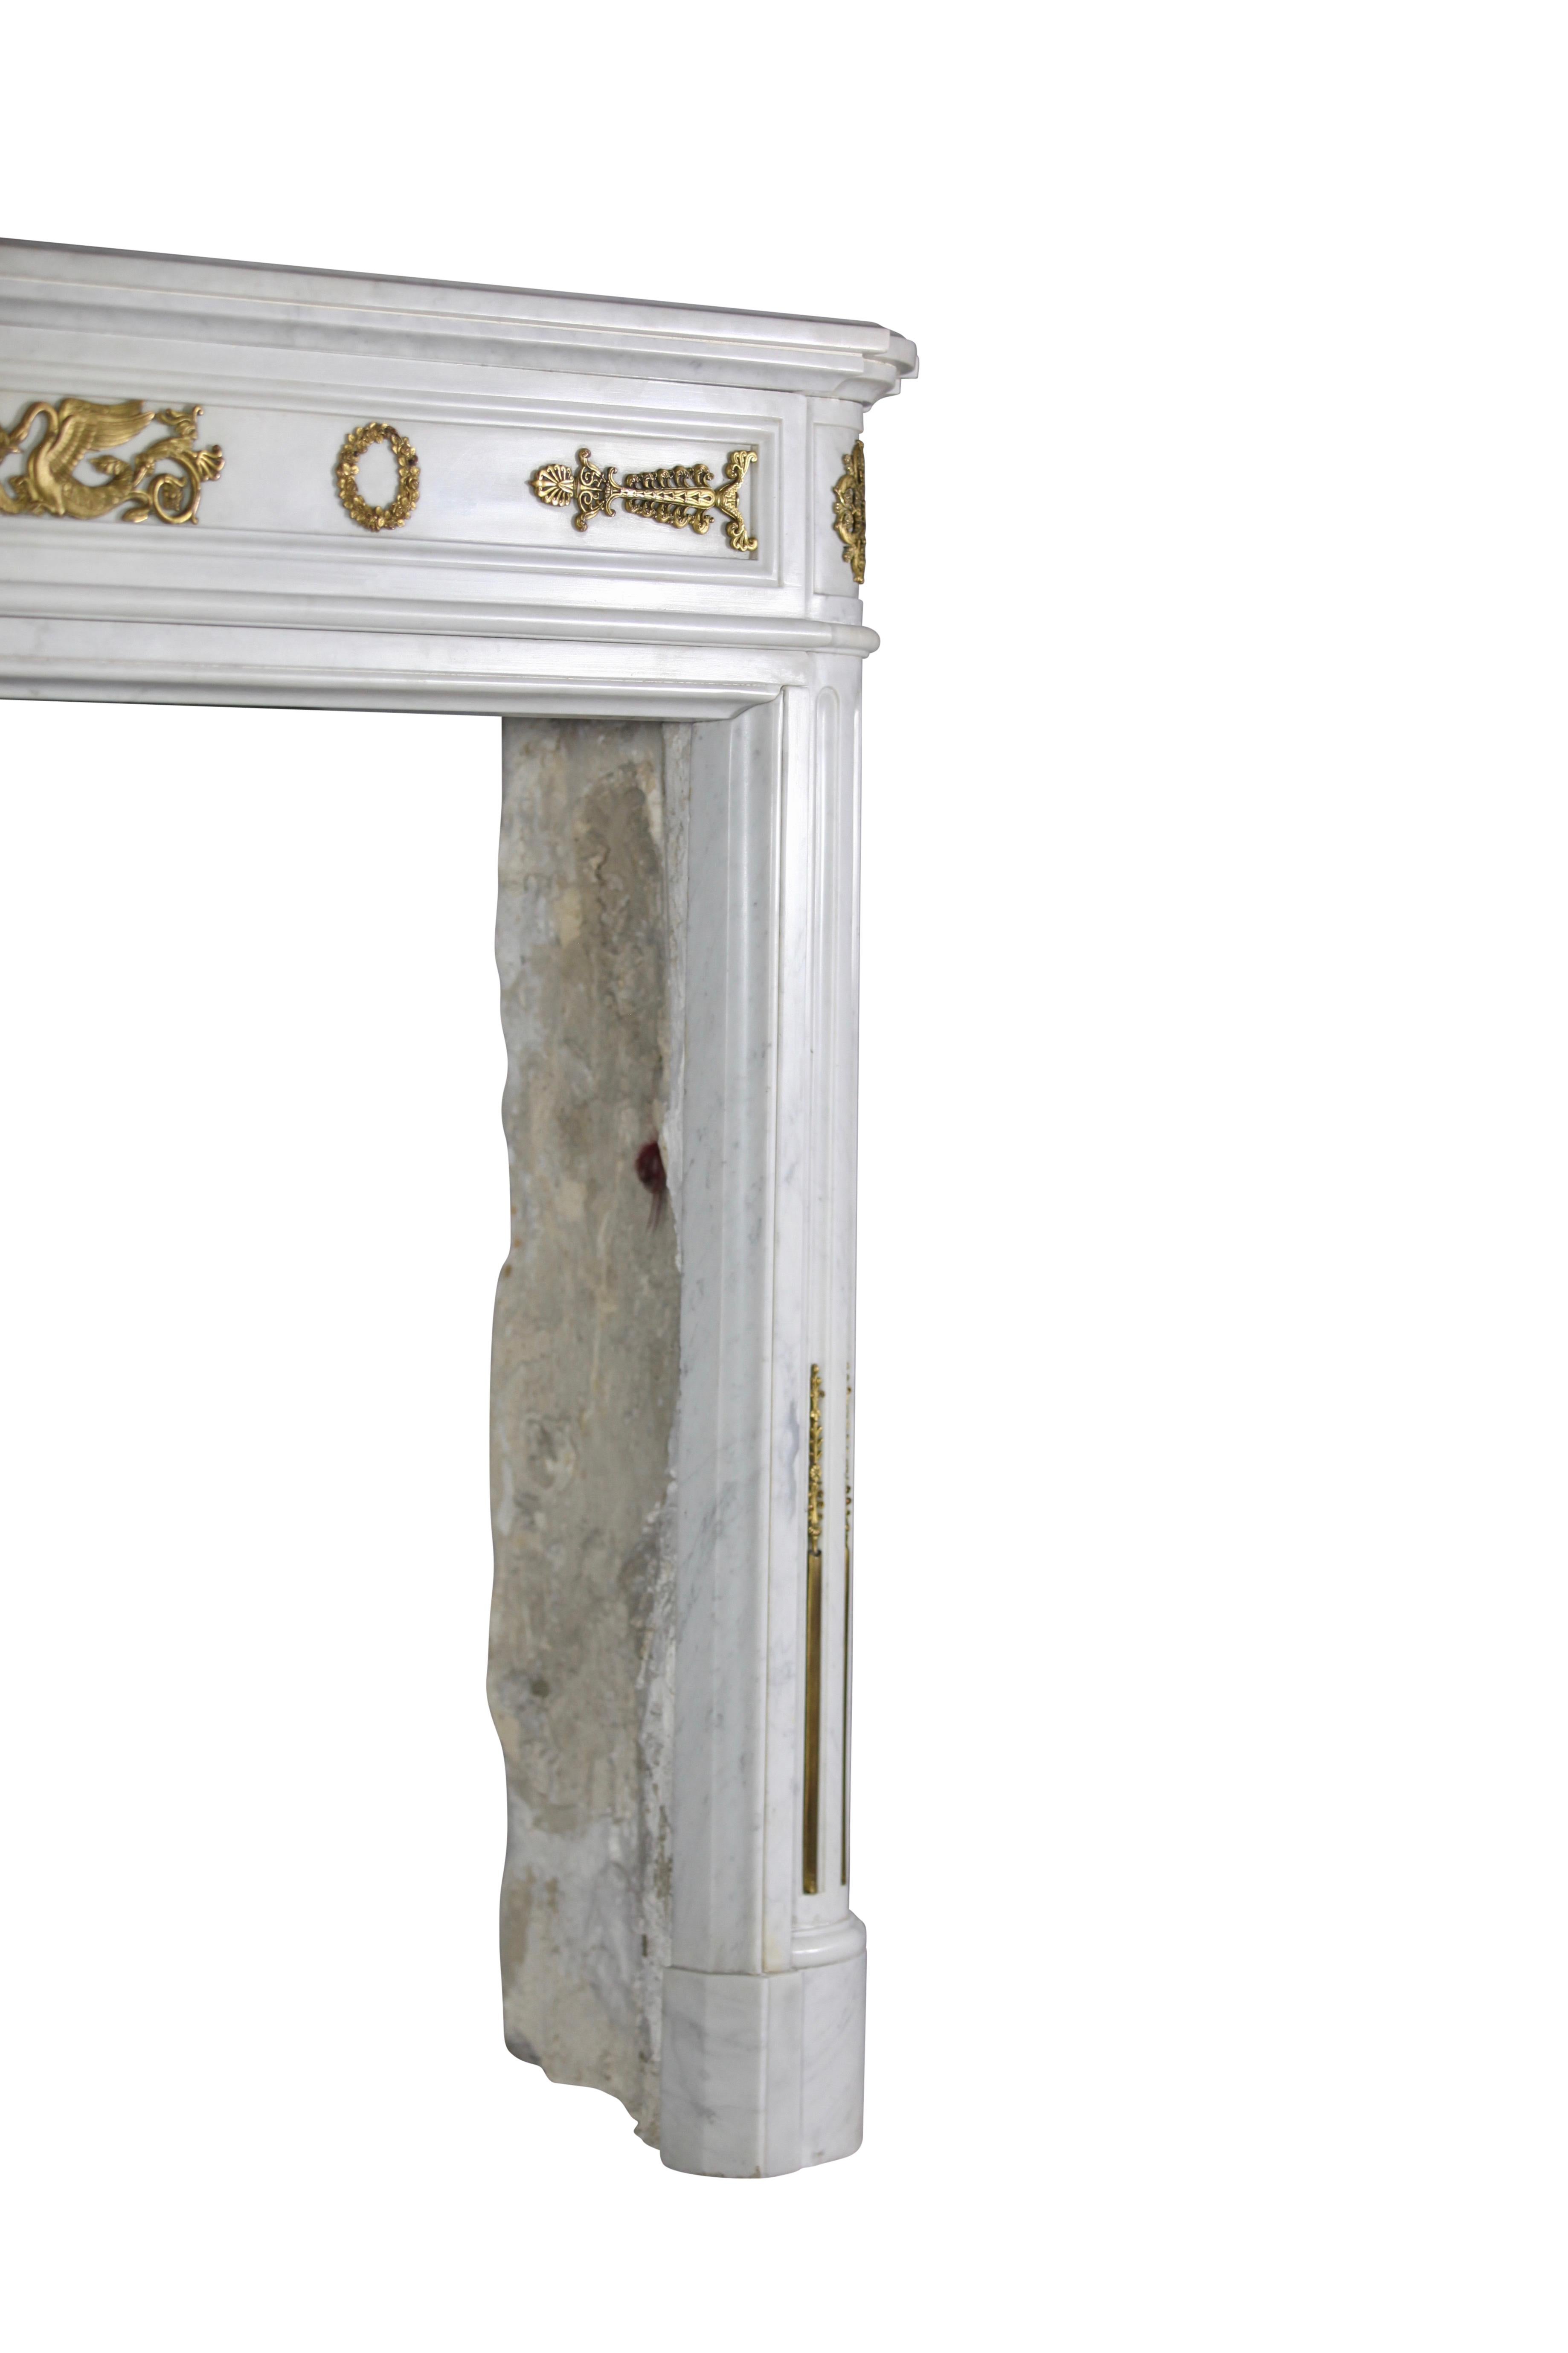 Fine 19th Century European Original Antique Fireplace Mantle from Empire Period For Sale 6